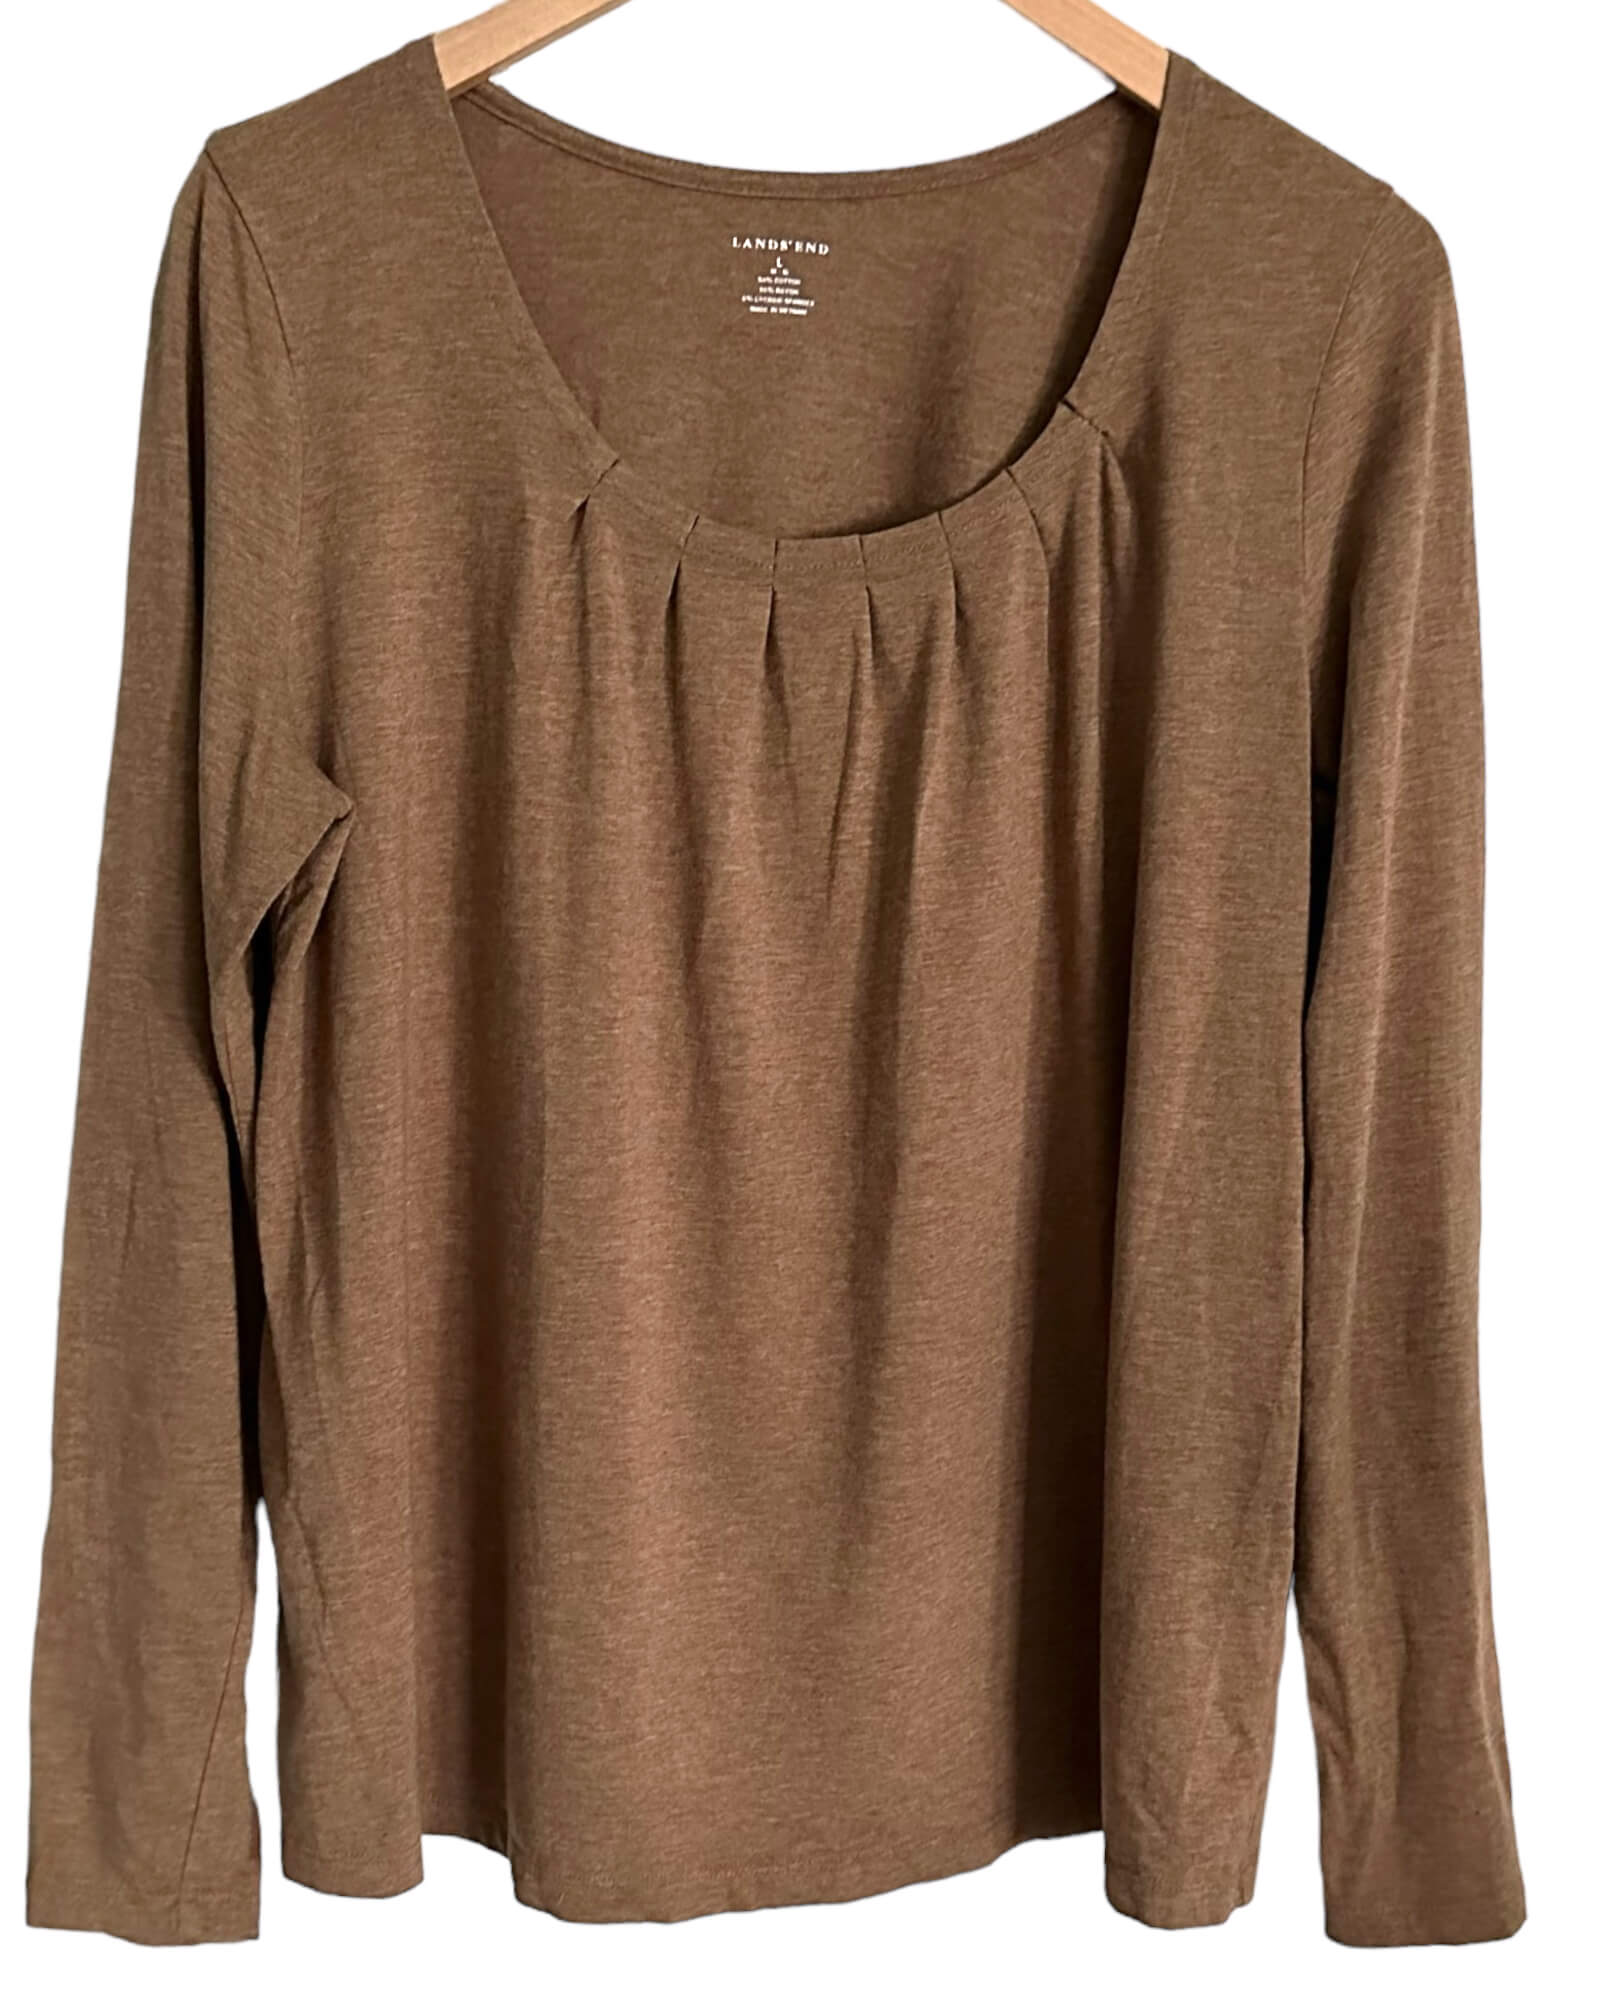 Soft Autumn LANDS' END pleated brown heather tee